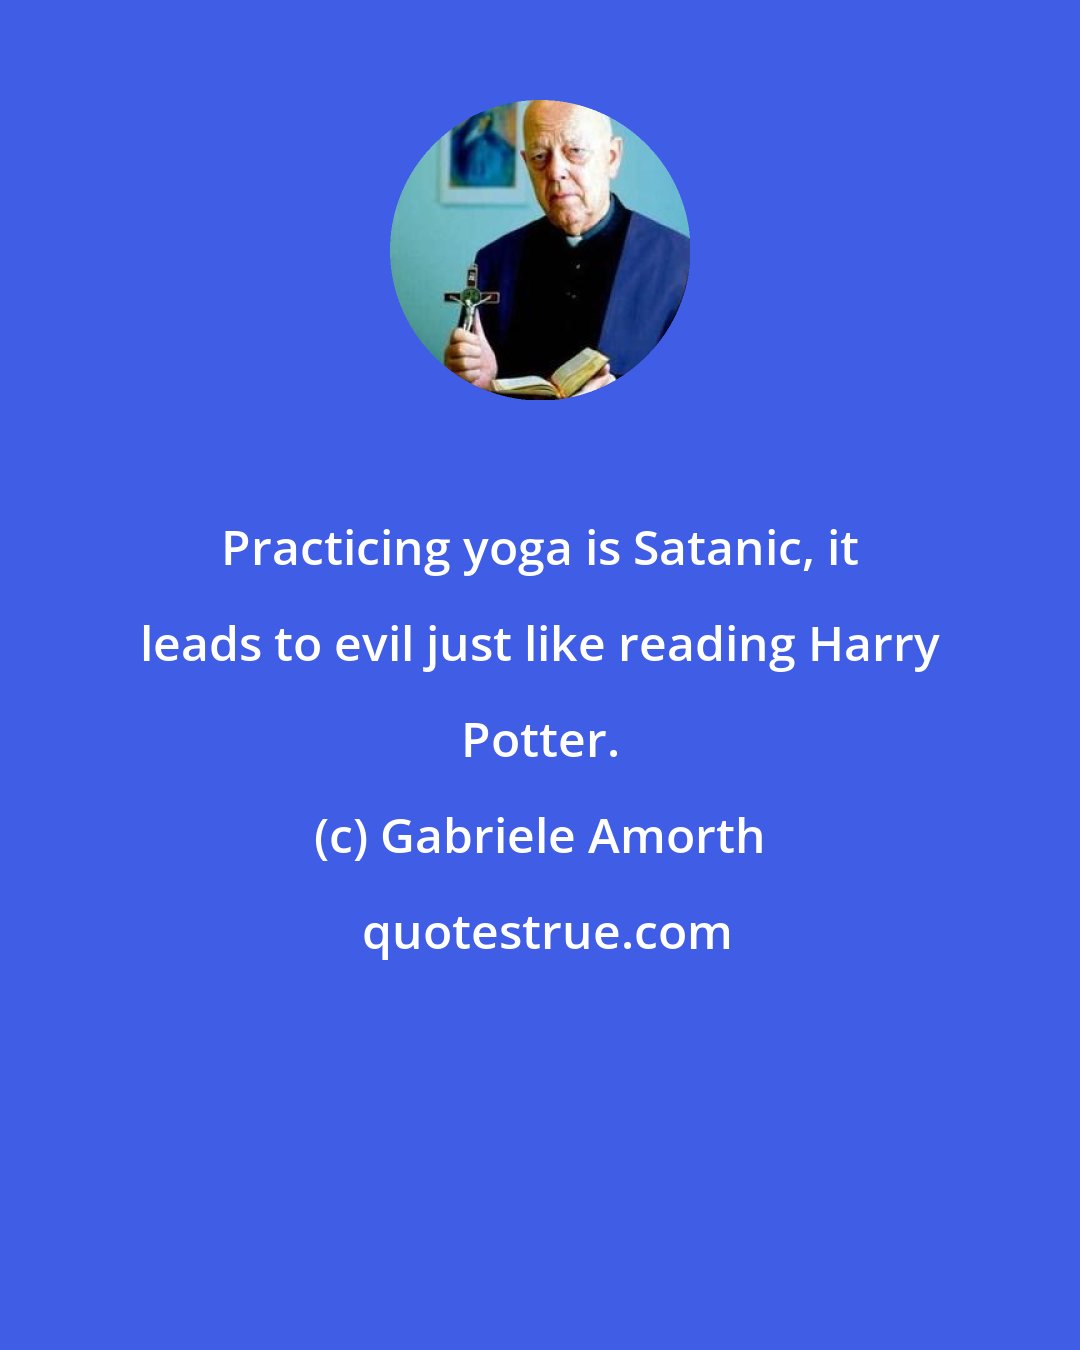 Gabriele Amorth: Practicing yoga is Satanic, it leads to evil just like reading Harry Potter.